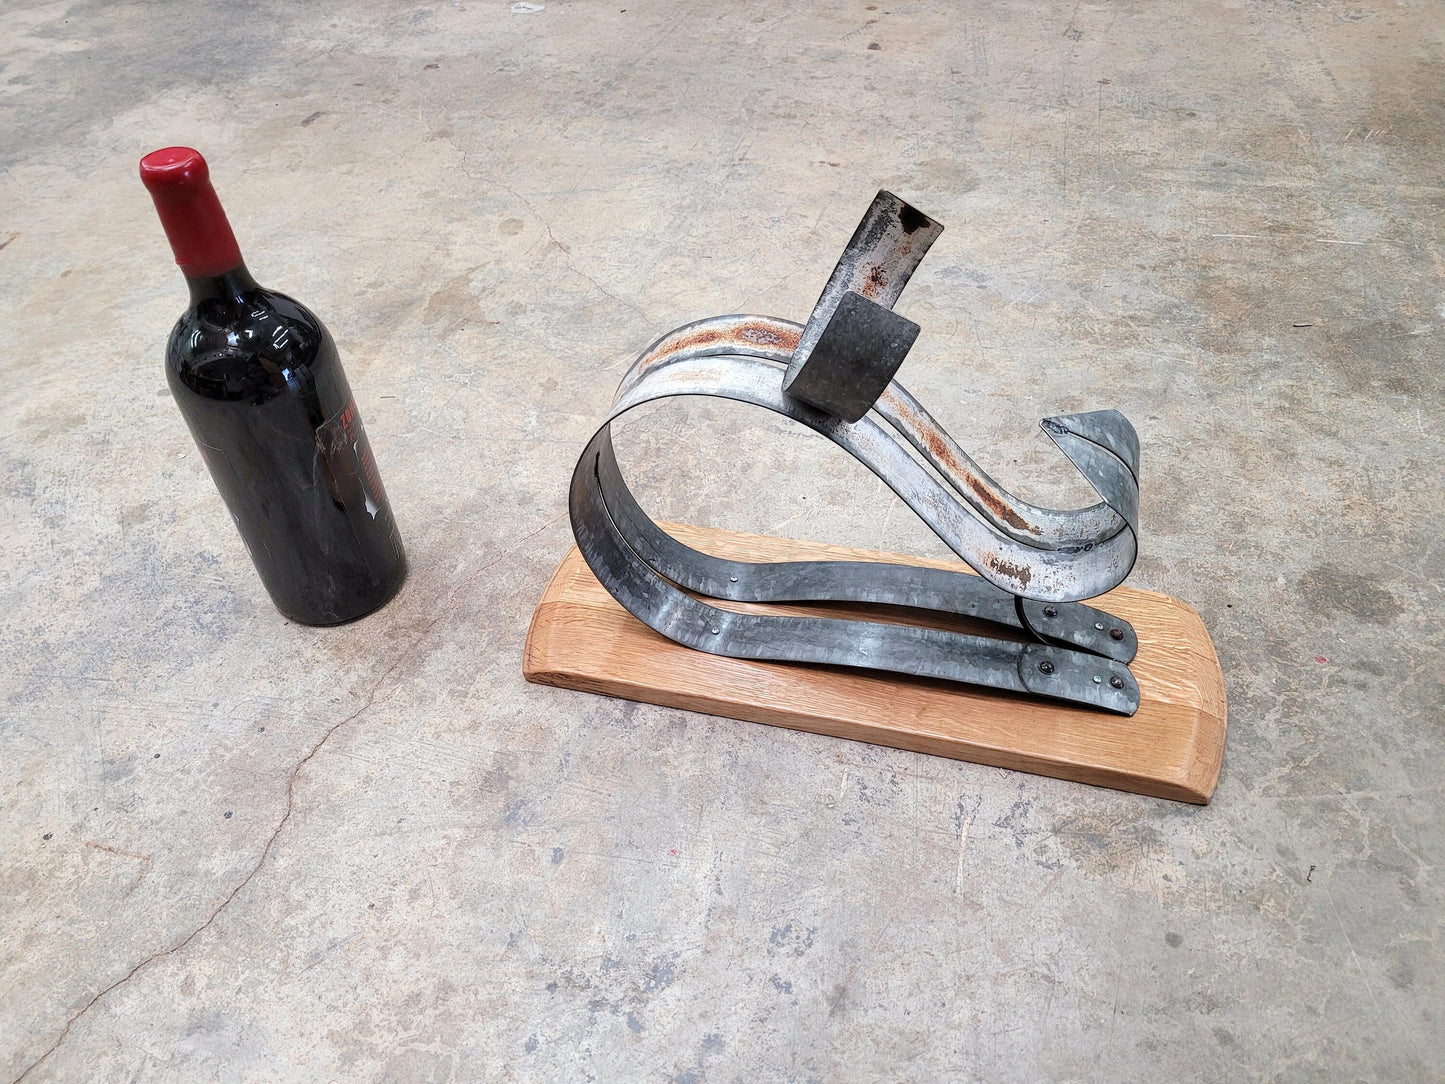 Magnum Wine Bottle Holder - Kuono - Made from retired California wine barrels. 100% Recycled!